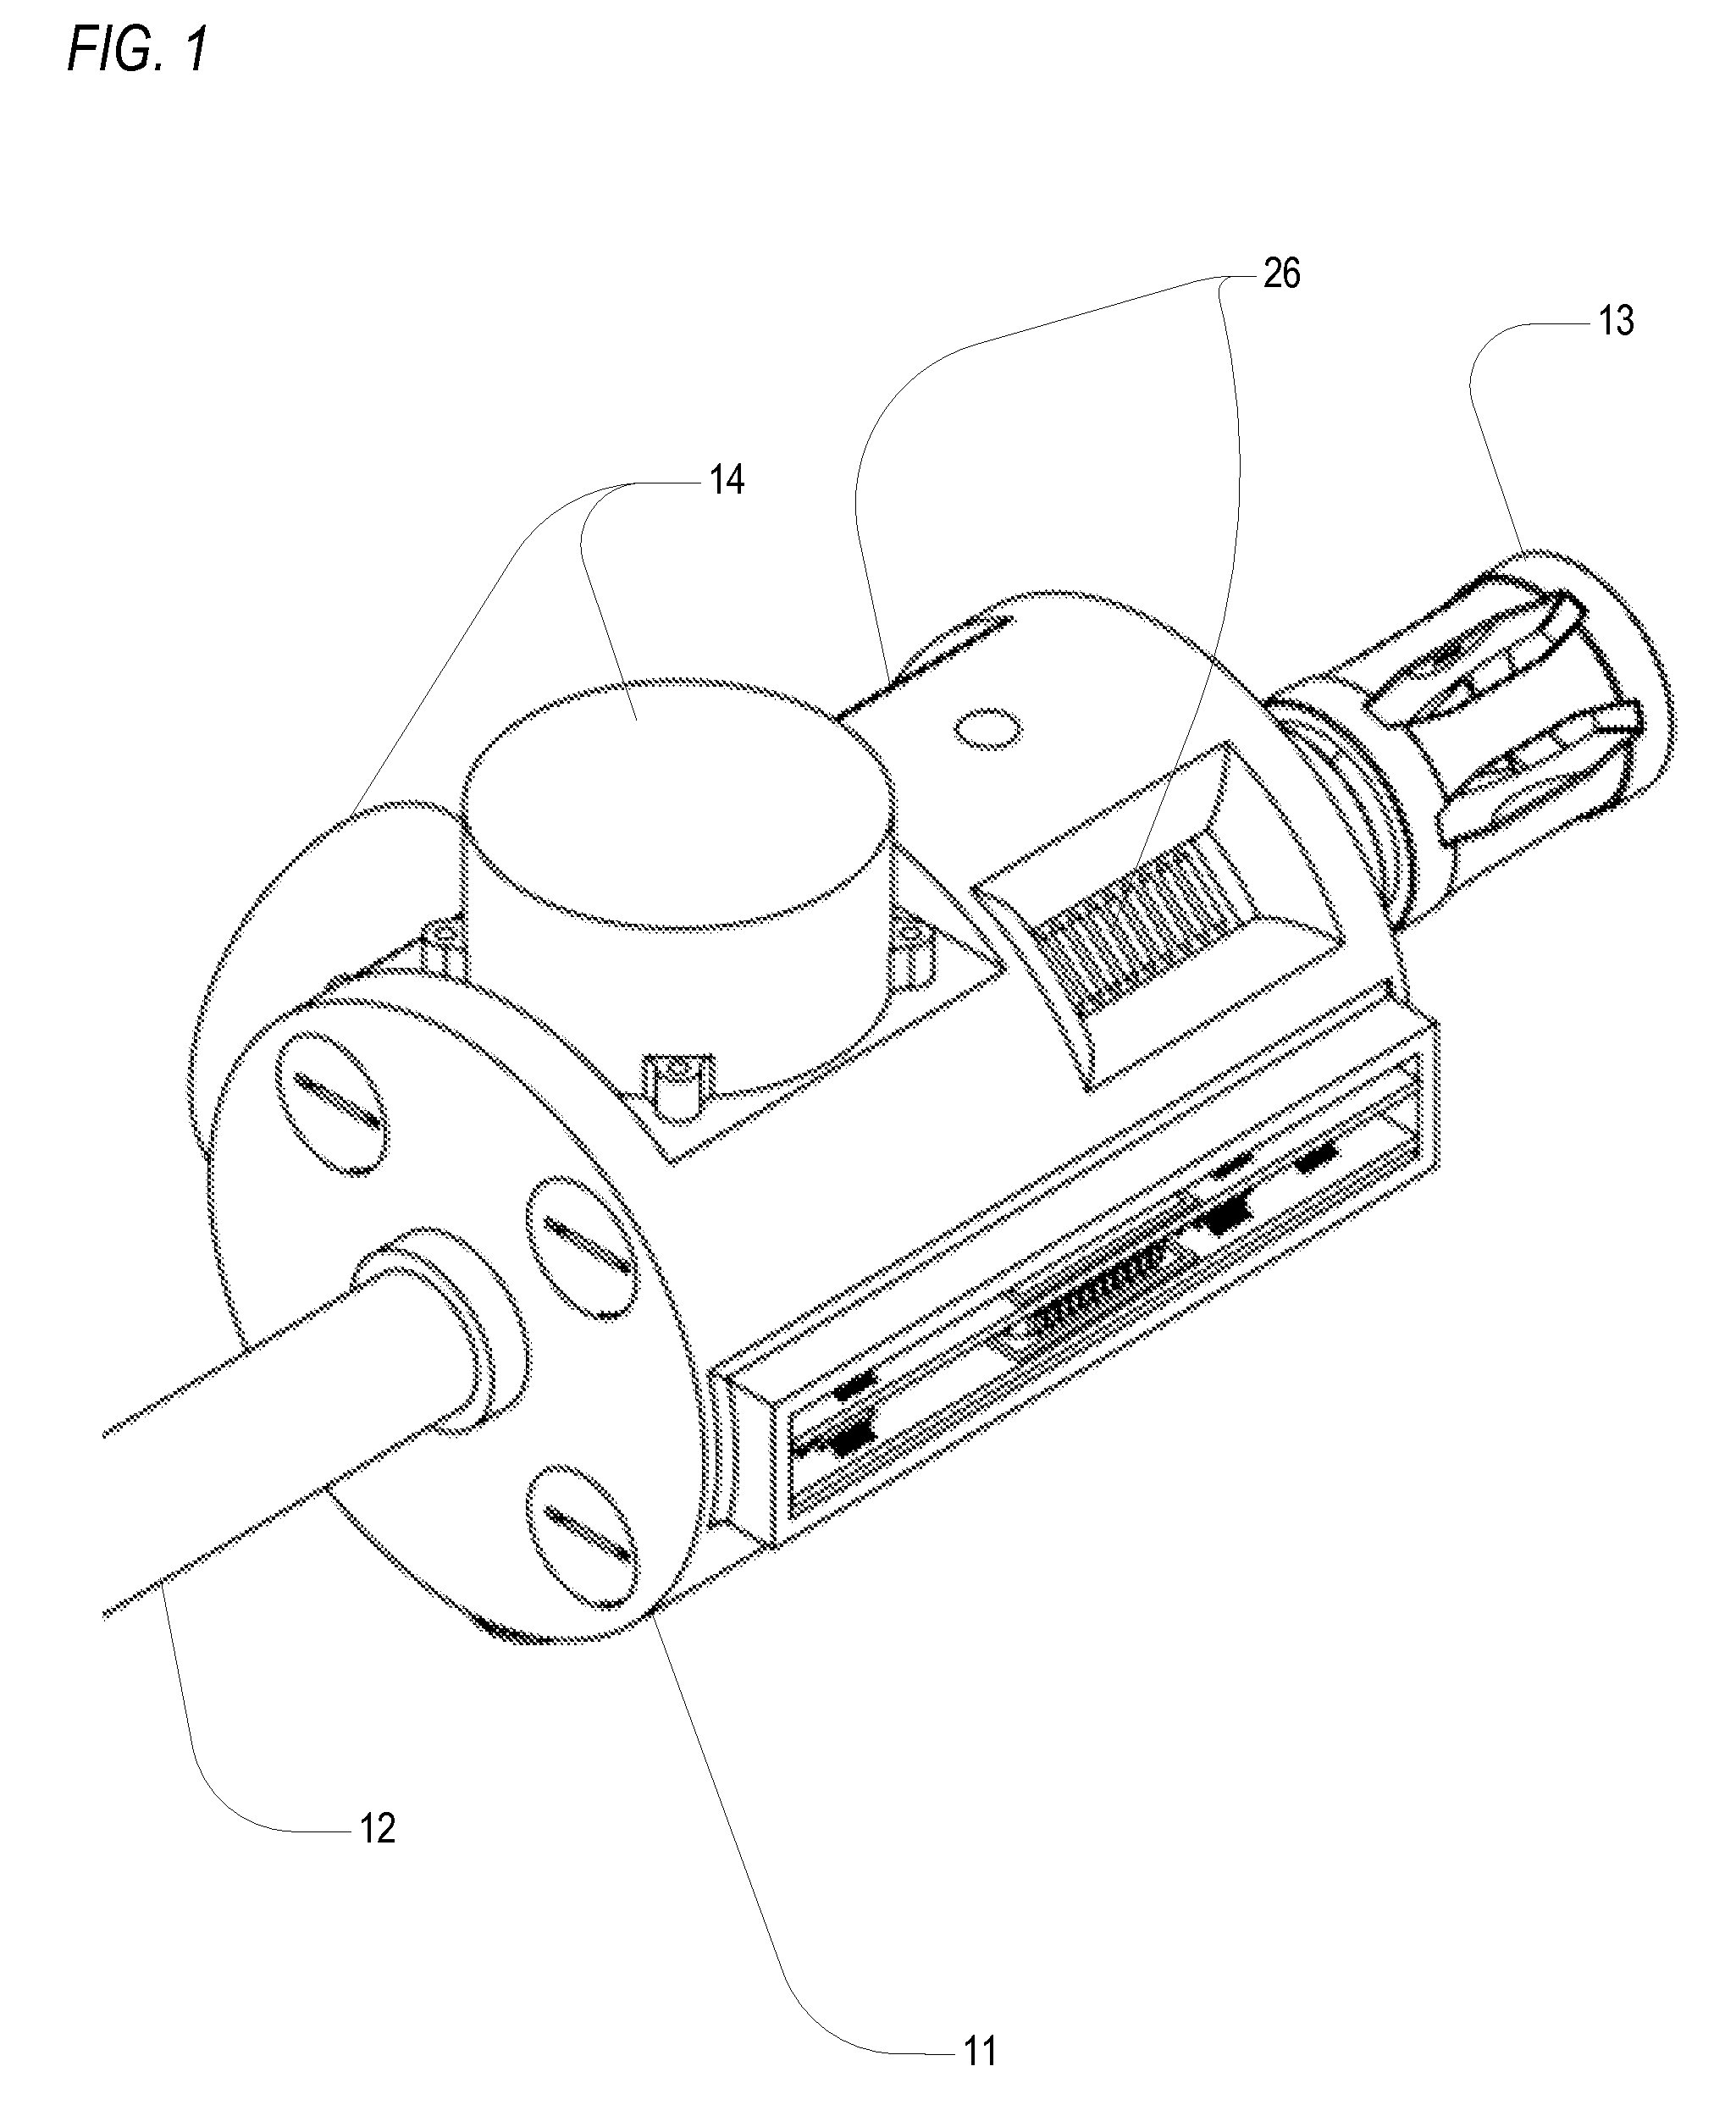 Feedback-controlled re-targeting apparatus for automatic firearm